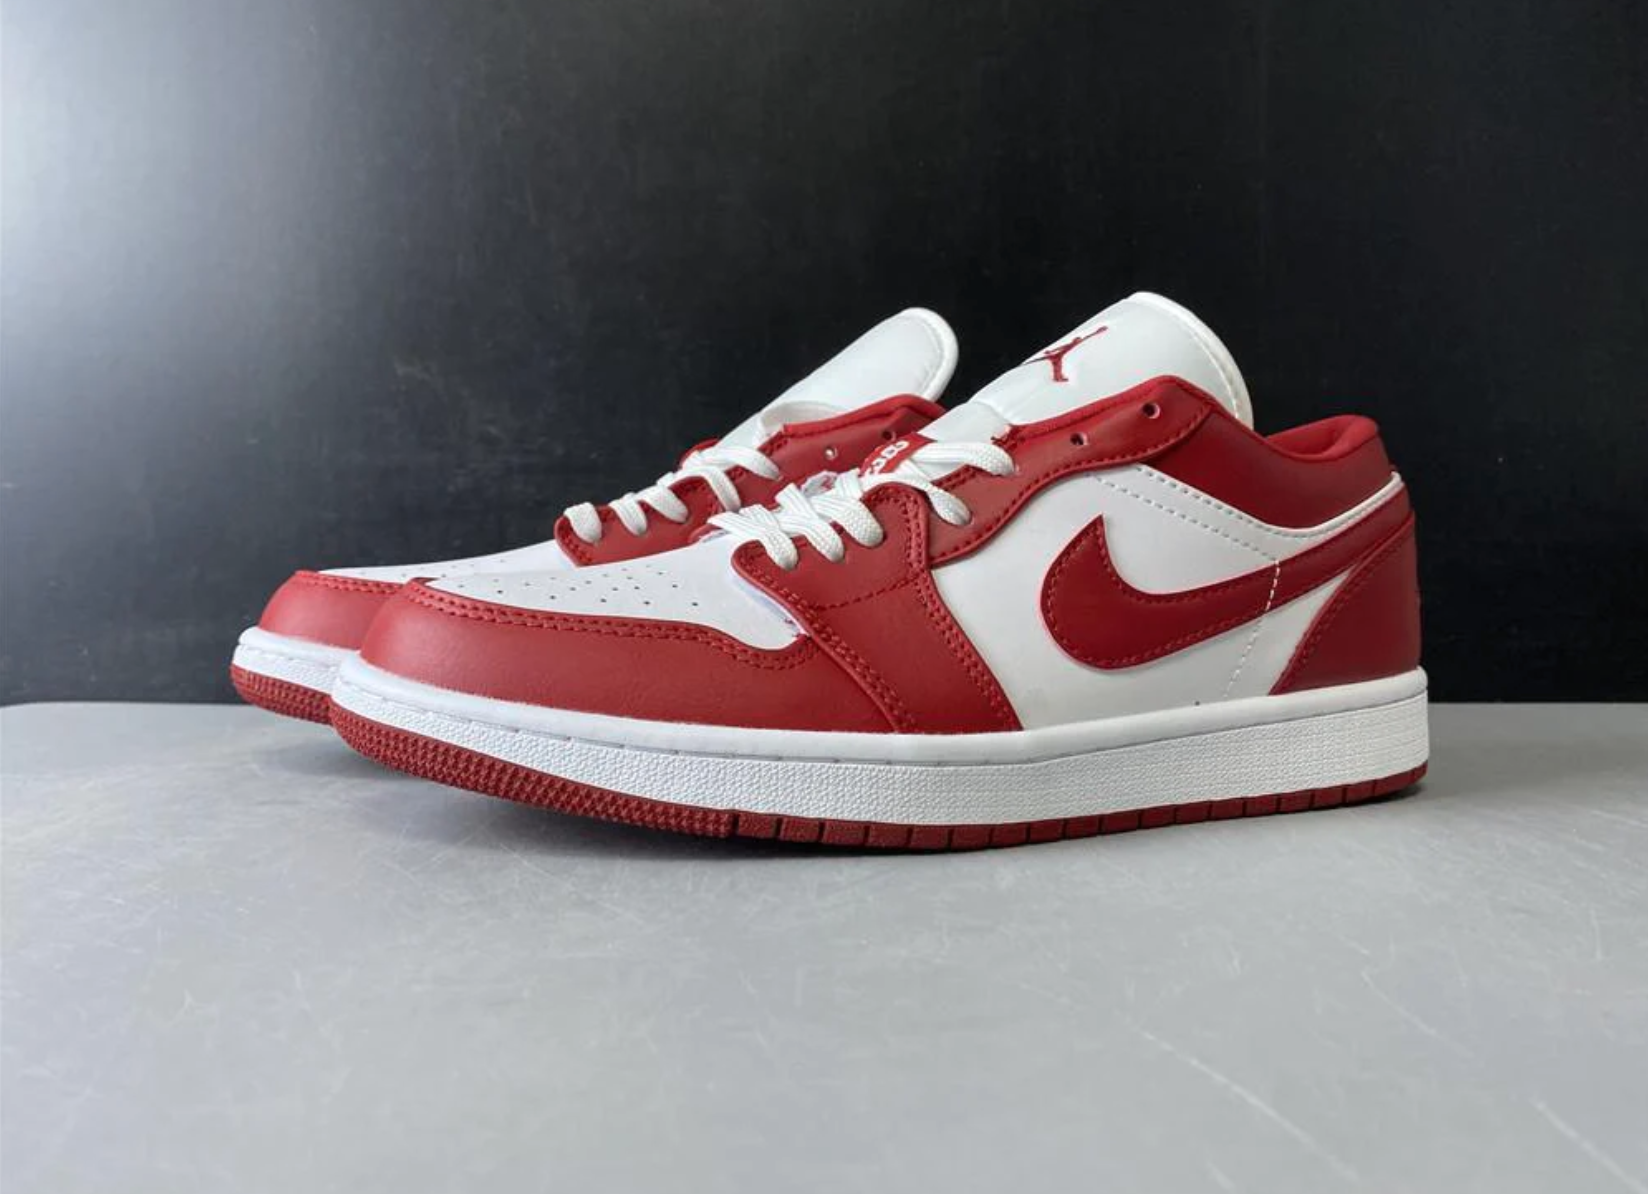 AJ 1 LOW GYM RED WHITE SHOES SNEAKERS 553558611 – Site gốc